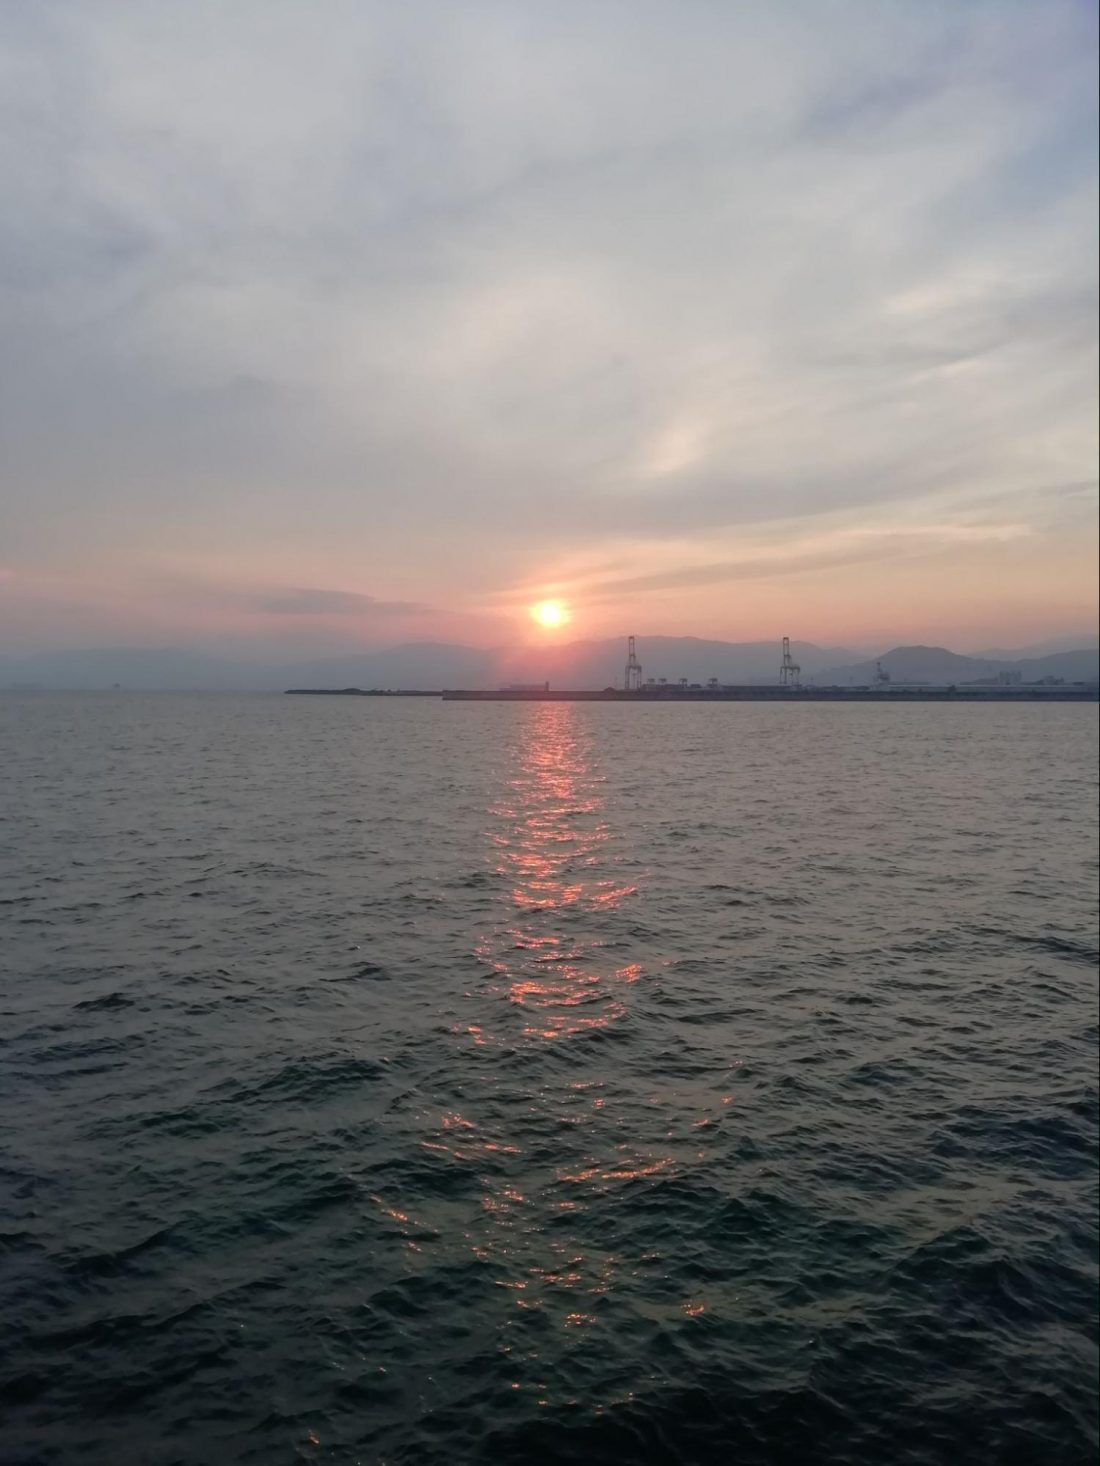 SUNSET CRUISE – An Inexpensive Way To End The Day With Beauty